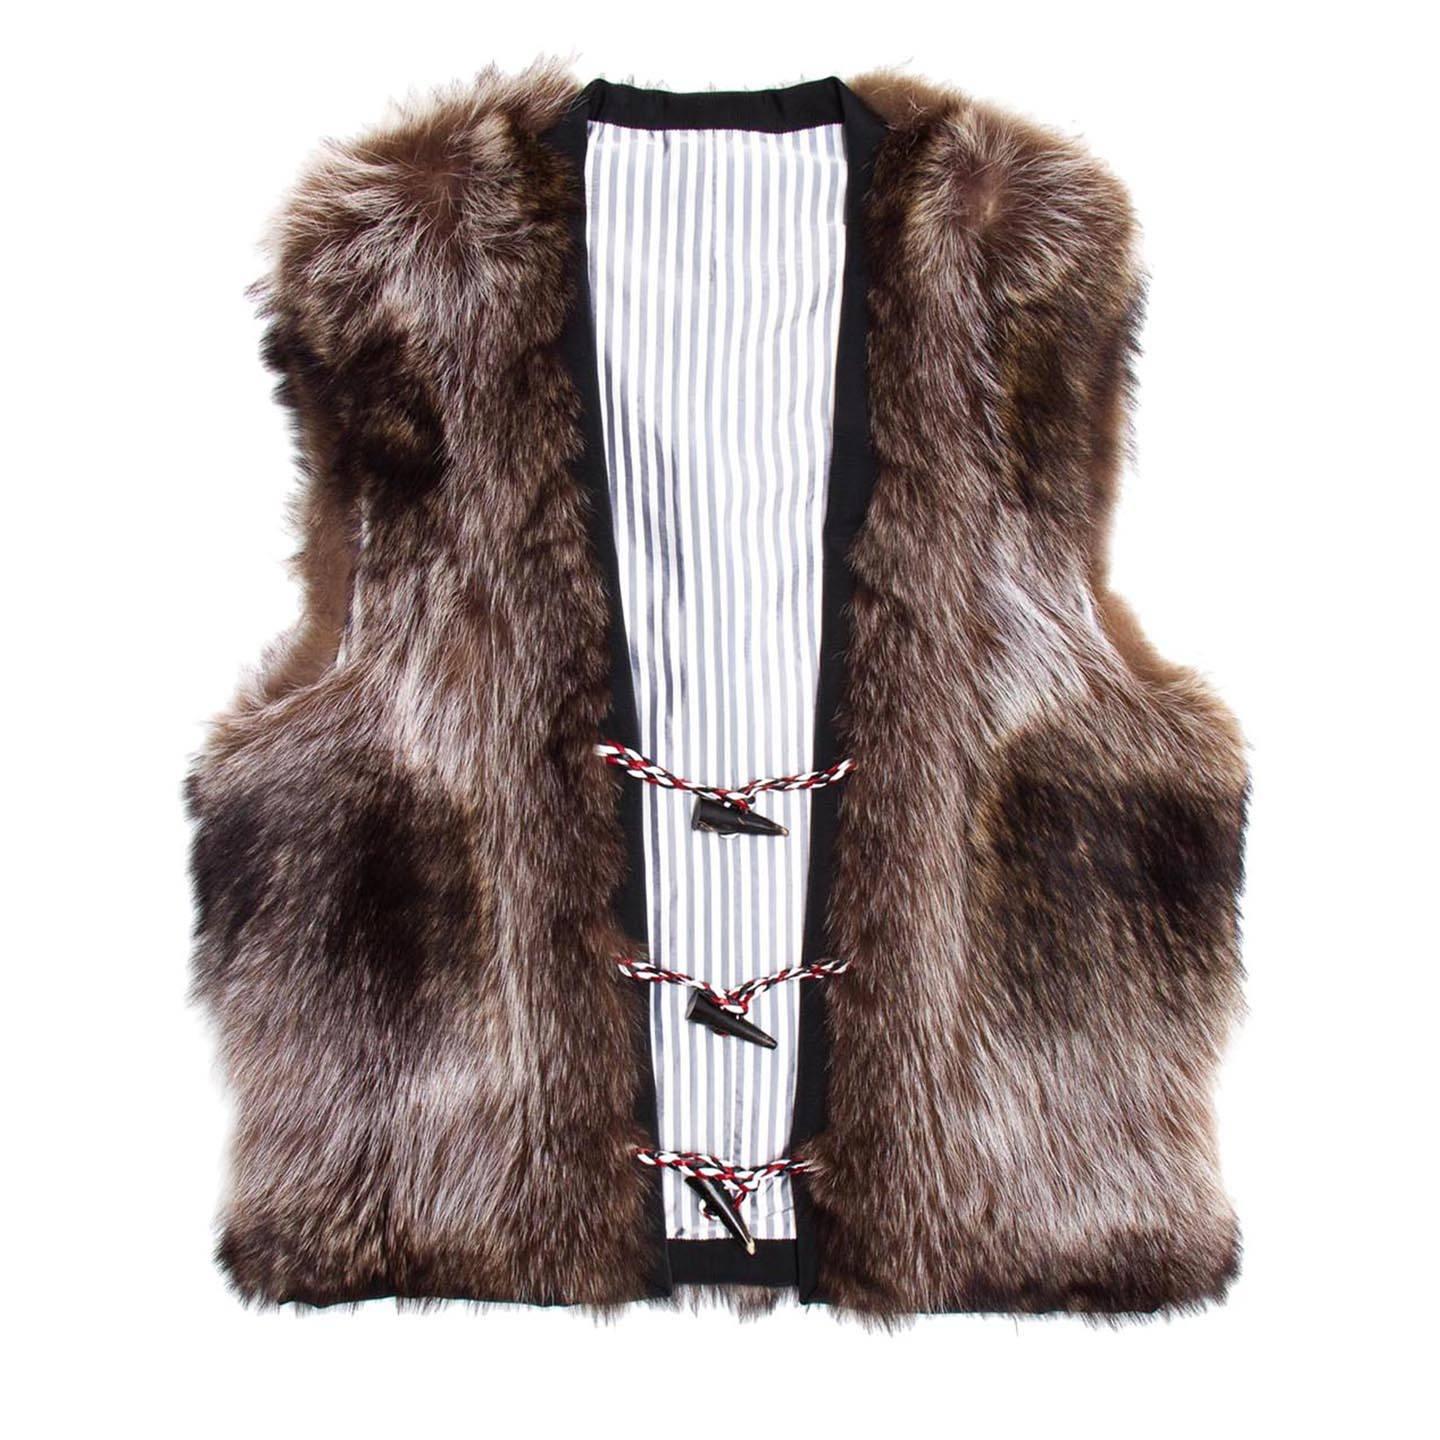 Waist length raccoon fur vest with horn toggles and red/white/blue braided leather loops closure. The profile of the vest is enriched by black grosgrain and the lining is striped white and grey. Made for Men Worn by Women too.

Size 